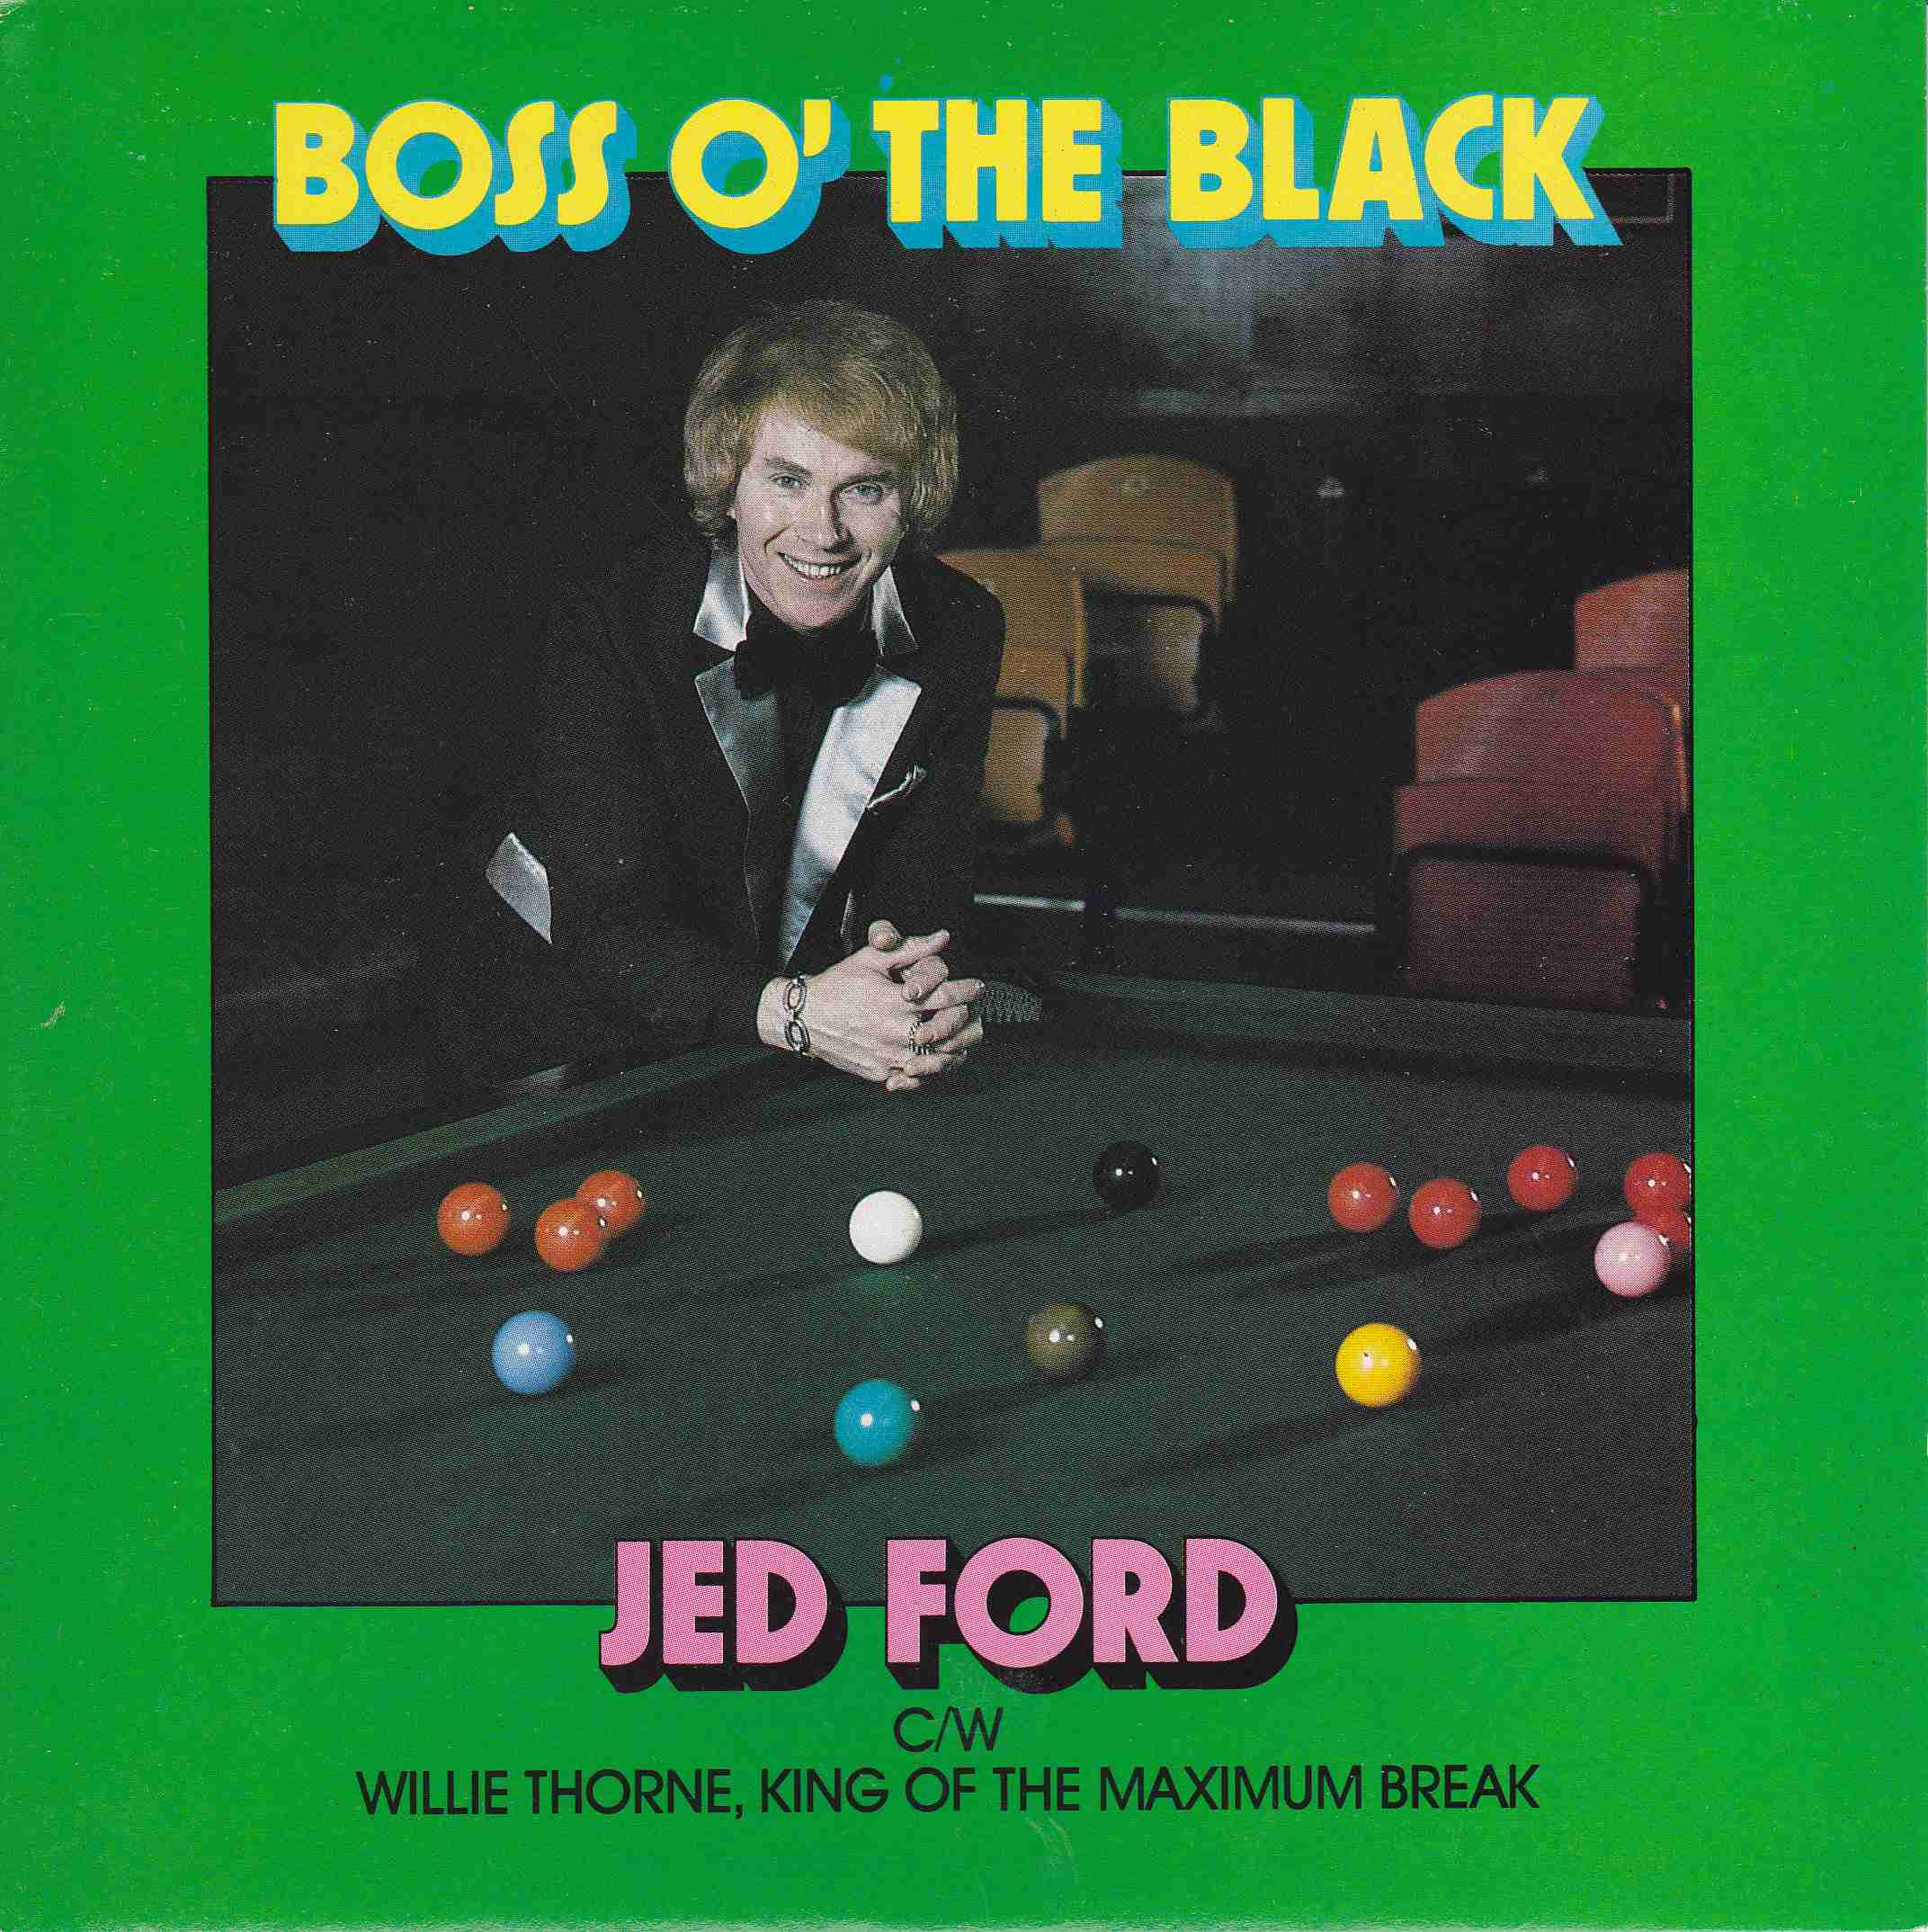 Picture of RESL 187 Boss o' the black by artist Jed Ford from the BBC singles - Records and Tapes library